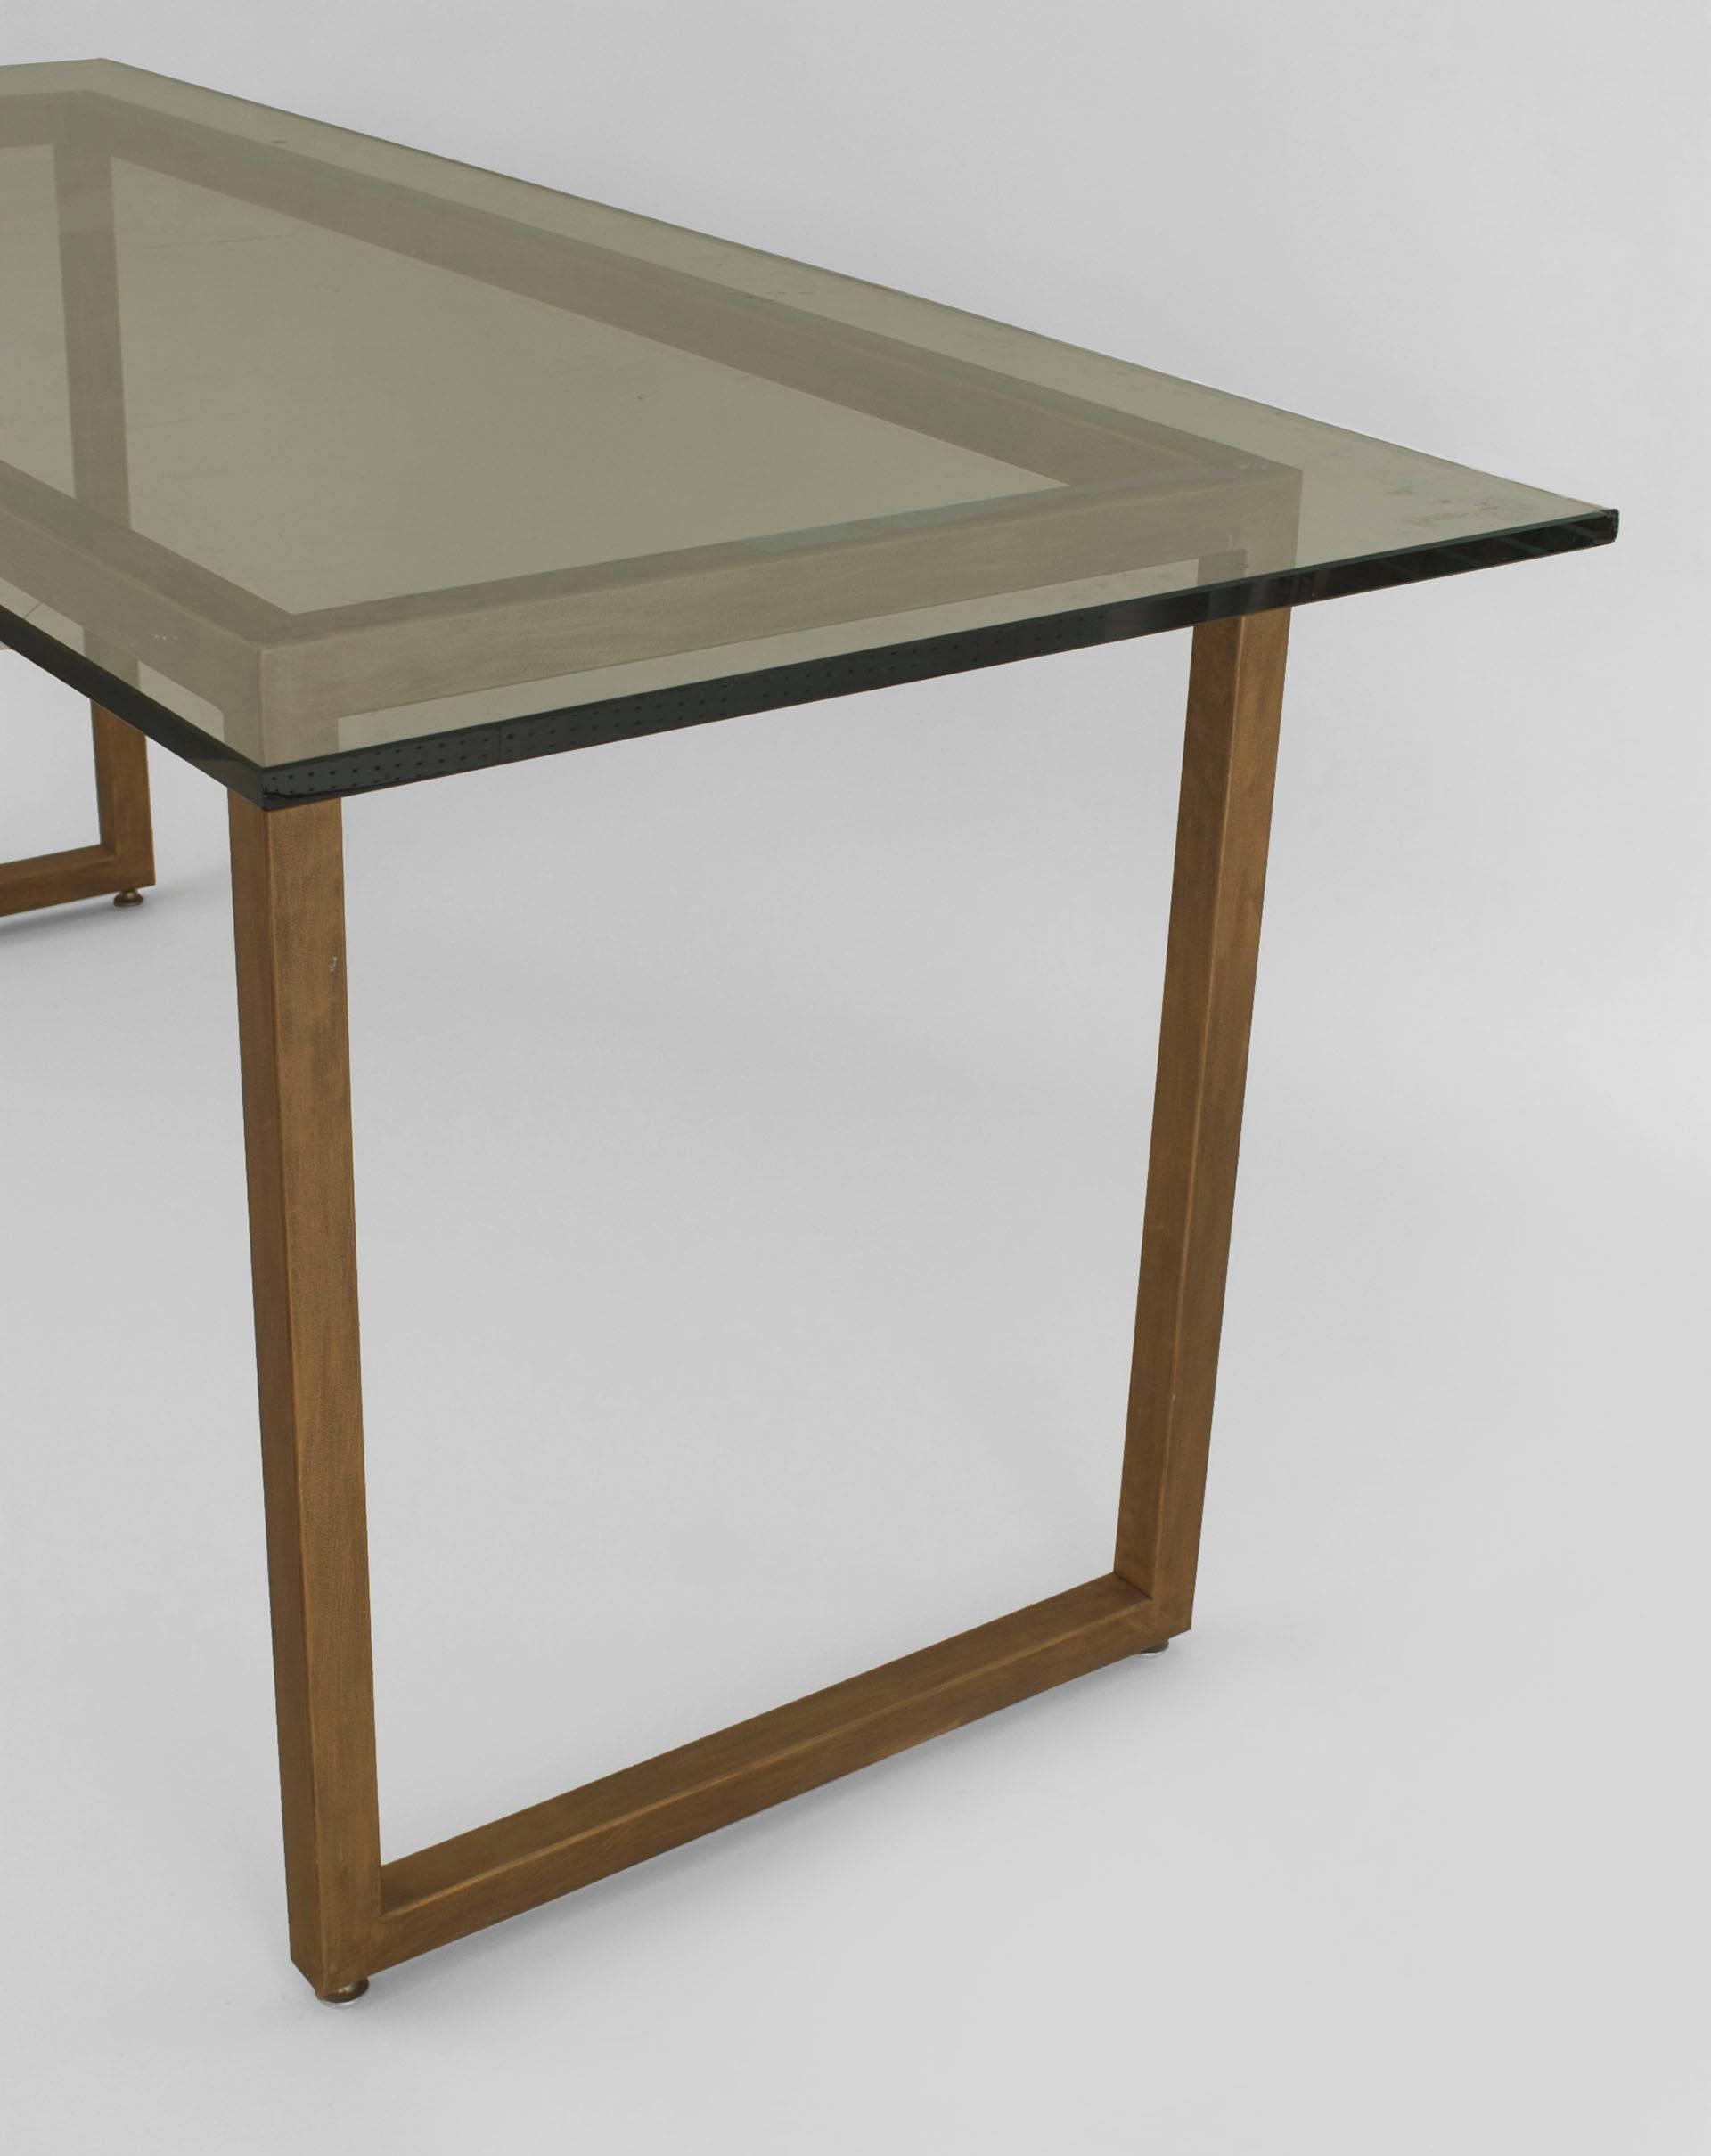 American Mid-Century Modern-style gold painted metal base dining table supporting a large rectangular glass top.
